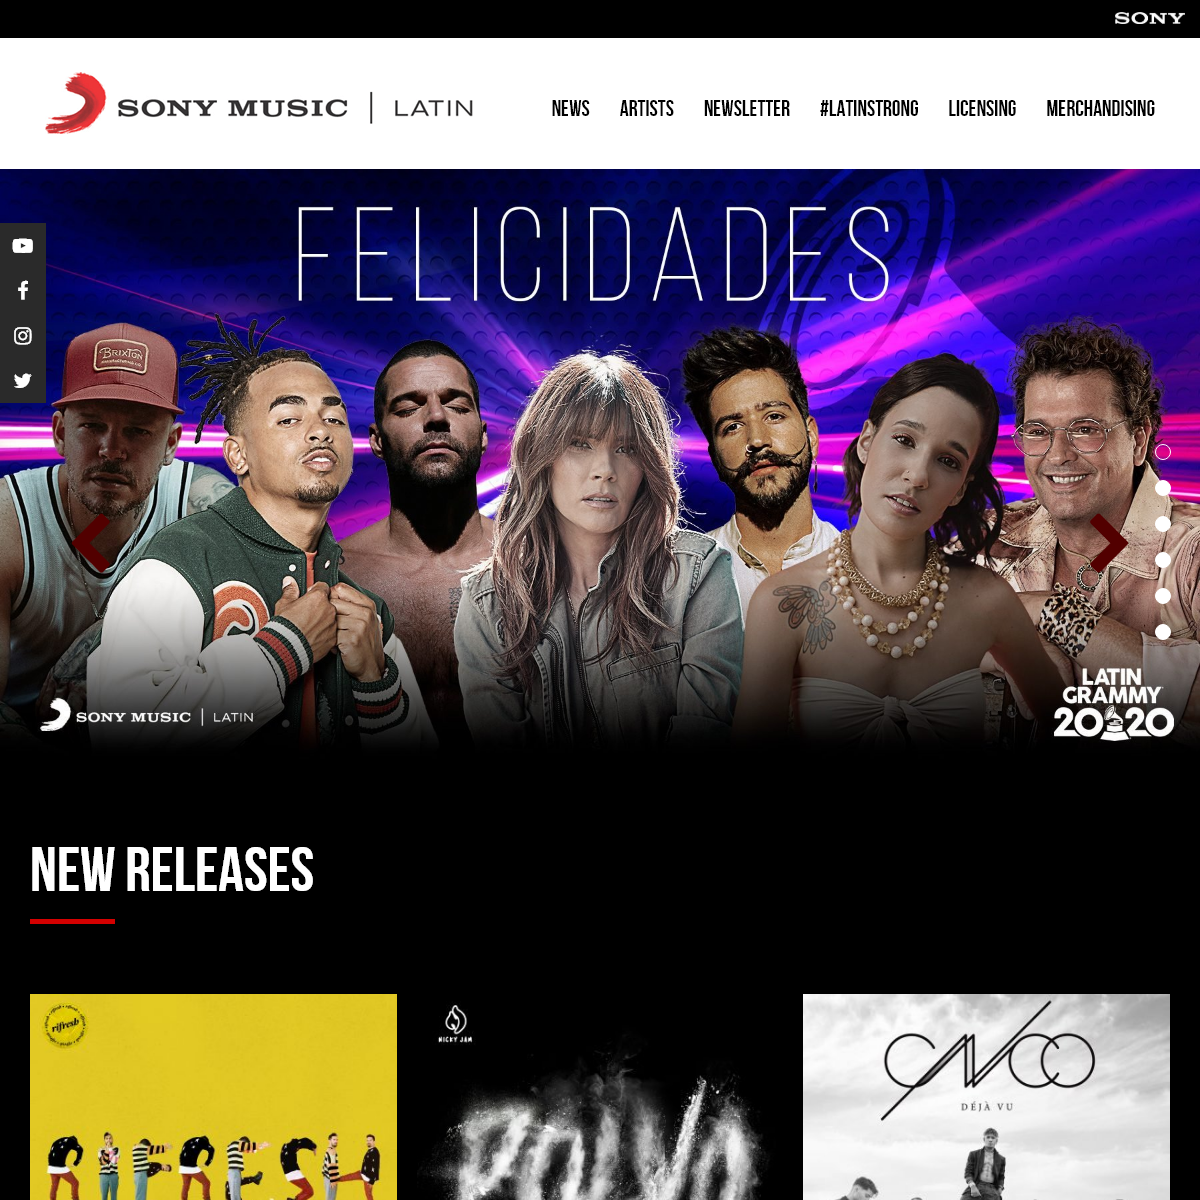 A complete backup of sonymusiclatin.com